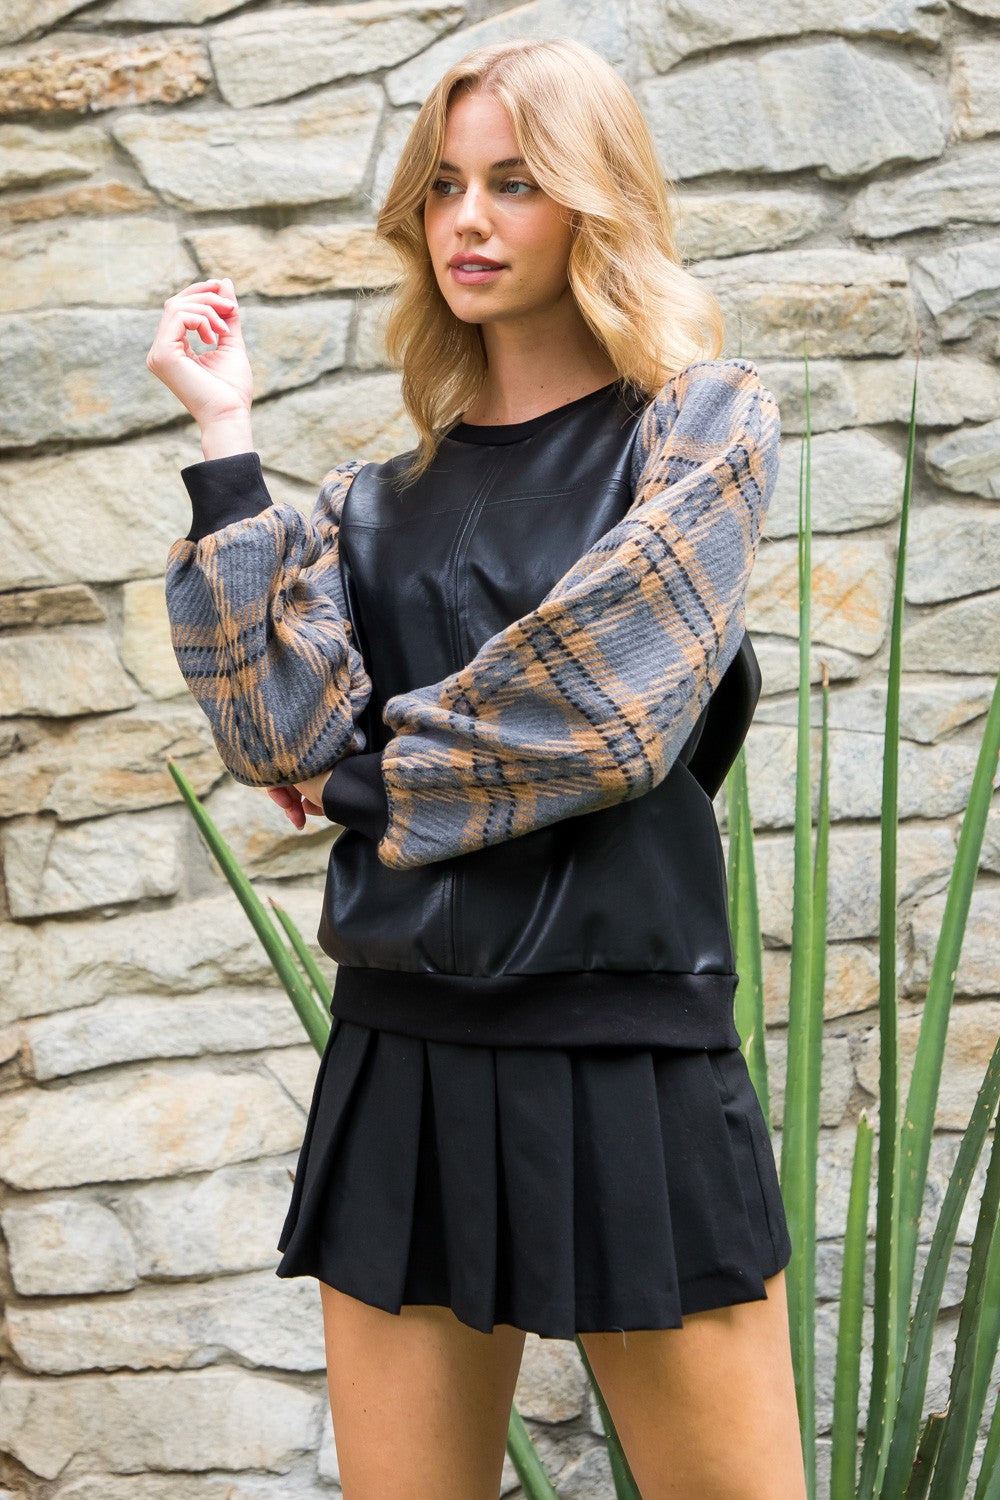 THML BLACK FAUX LEATHER TOP WITH CONTRAST PLAID SLEEVES FINAL SALE